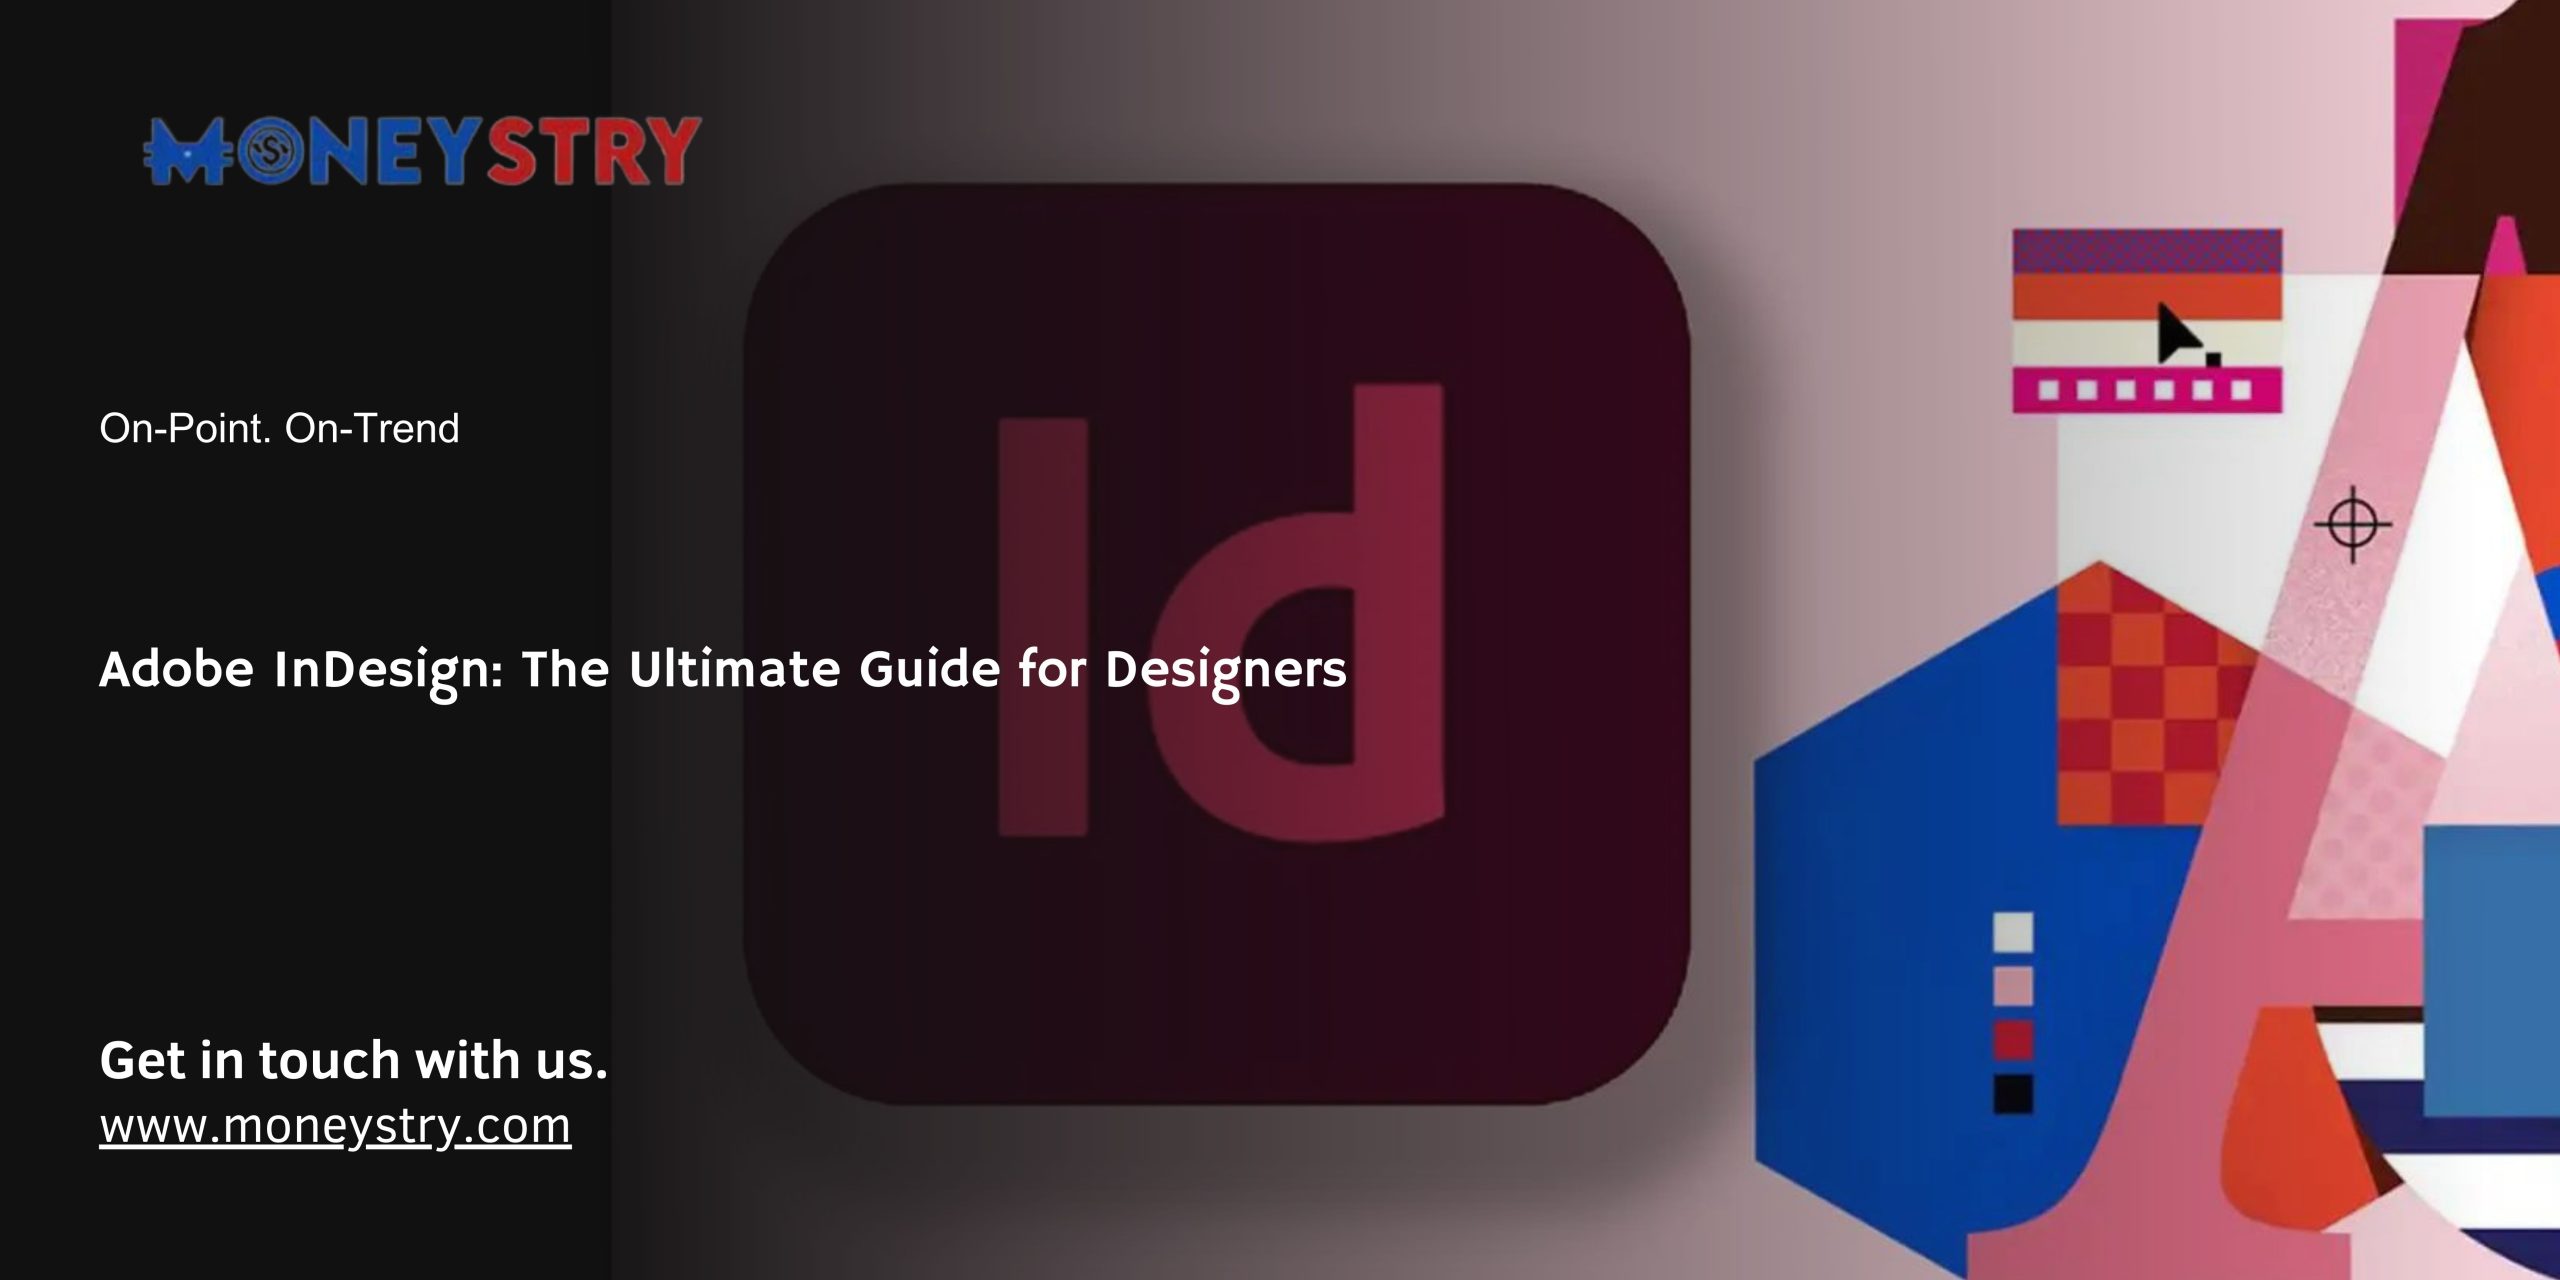 Adobe InDesign: The Ultimate Guide for Designers